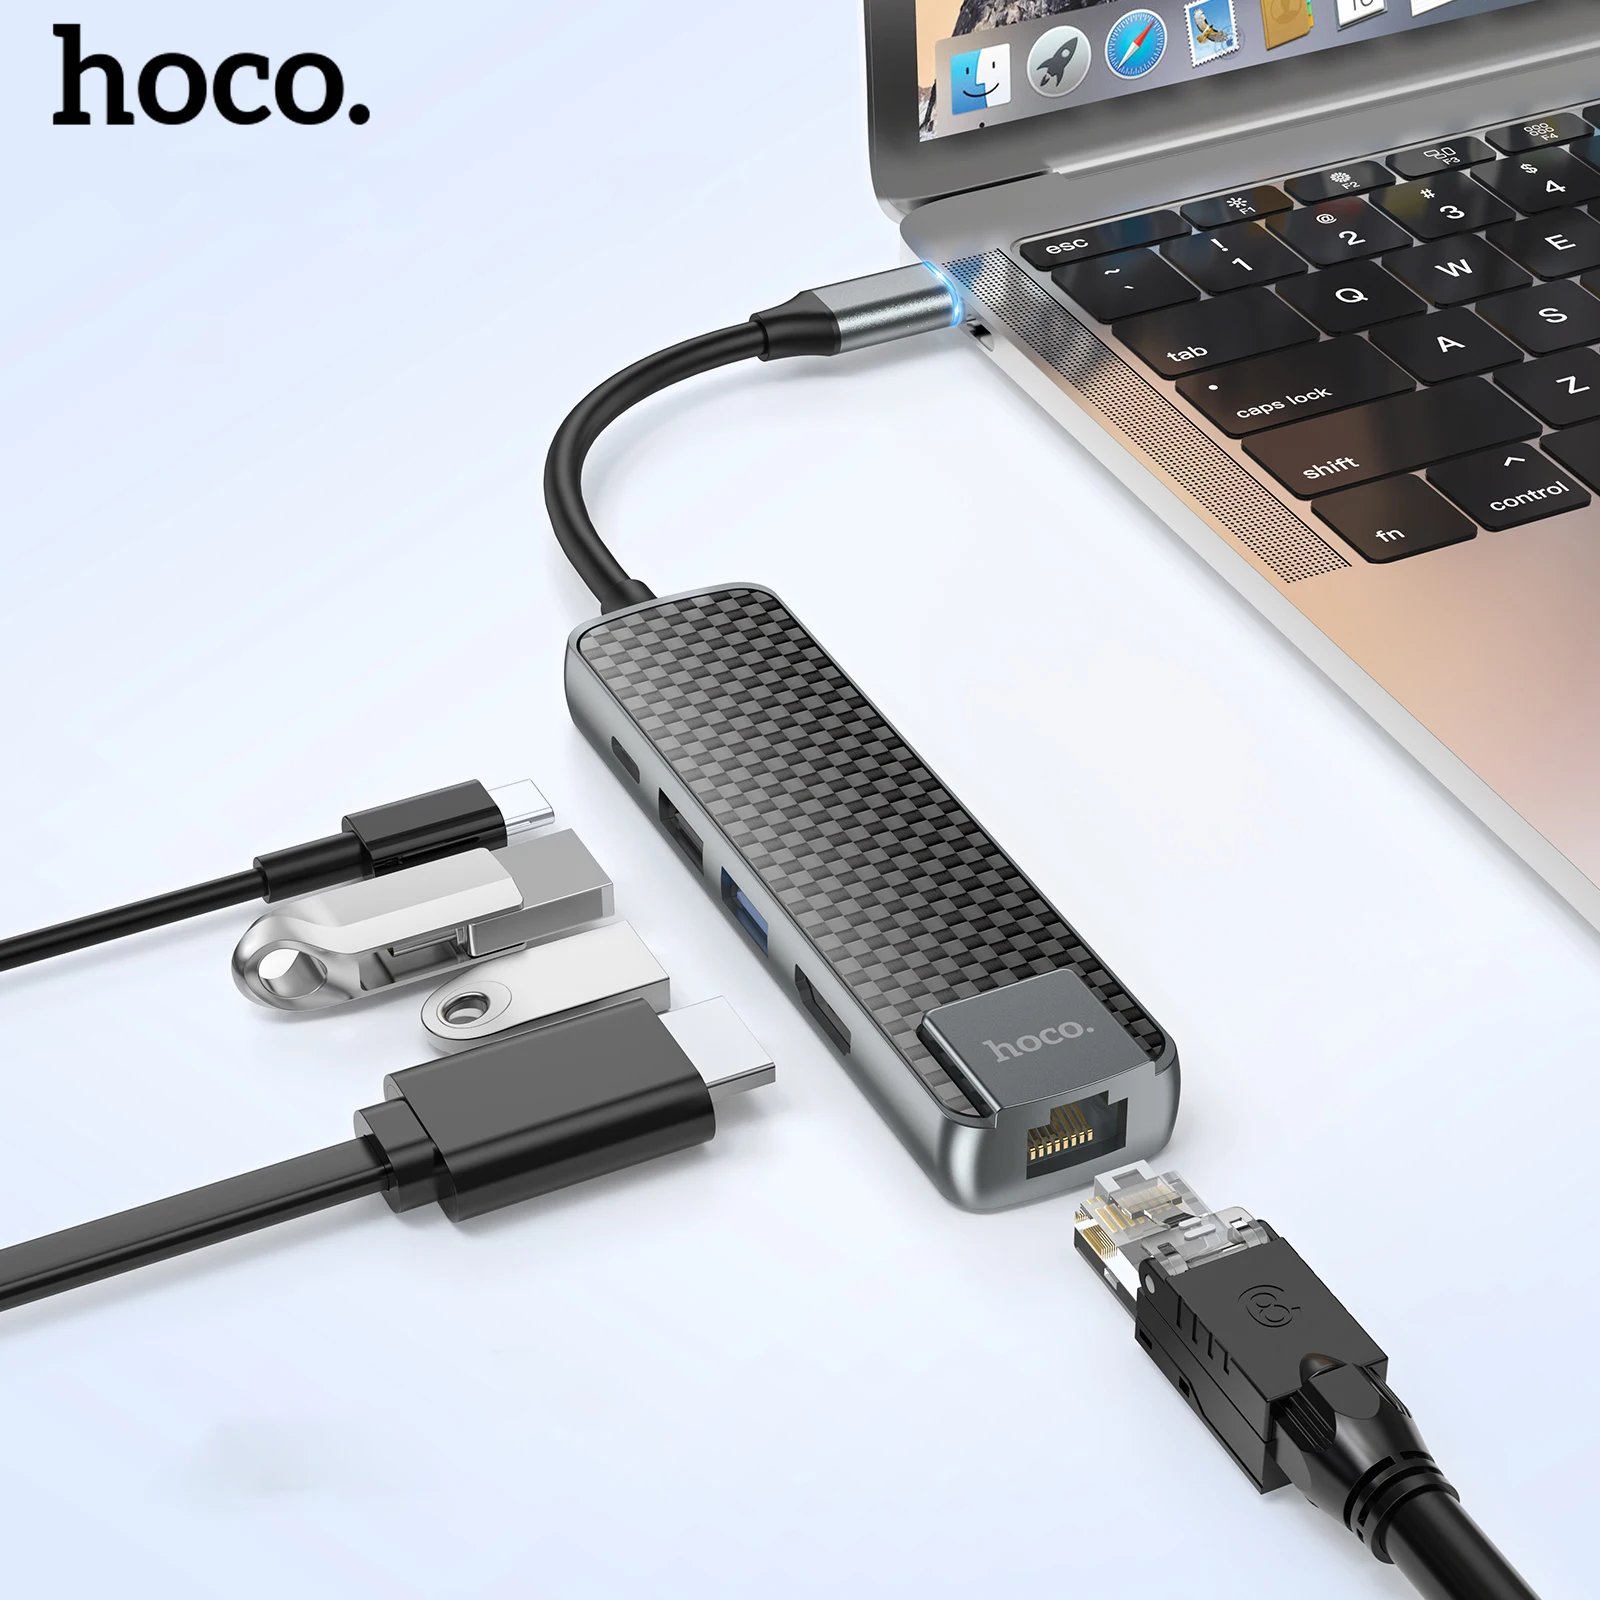 

HOCO USB C Hub Type C to HDMI-compatible USB 3.0 OTG Adapter 4K 30Hz RJ45 PD60W USB C Dock For MacBook Air Pro 2020 Data Tansfer